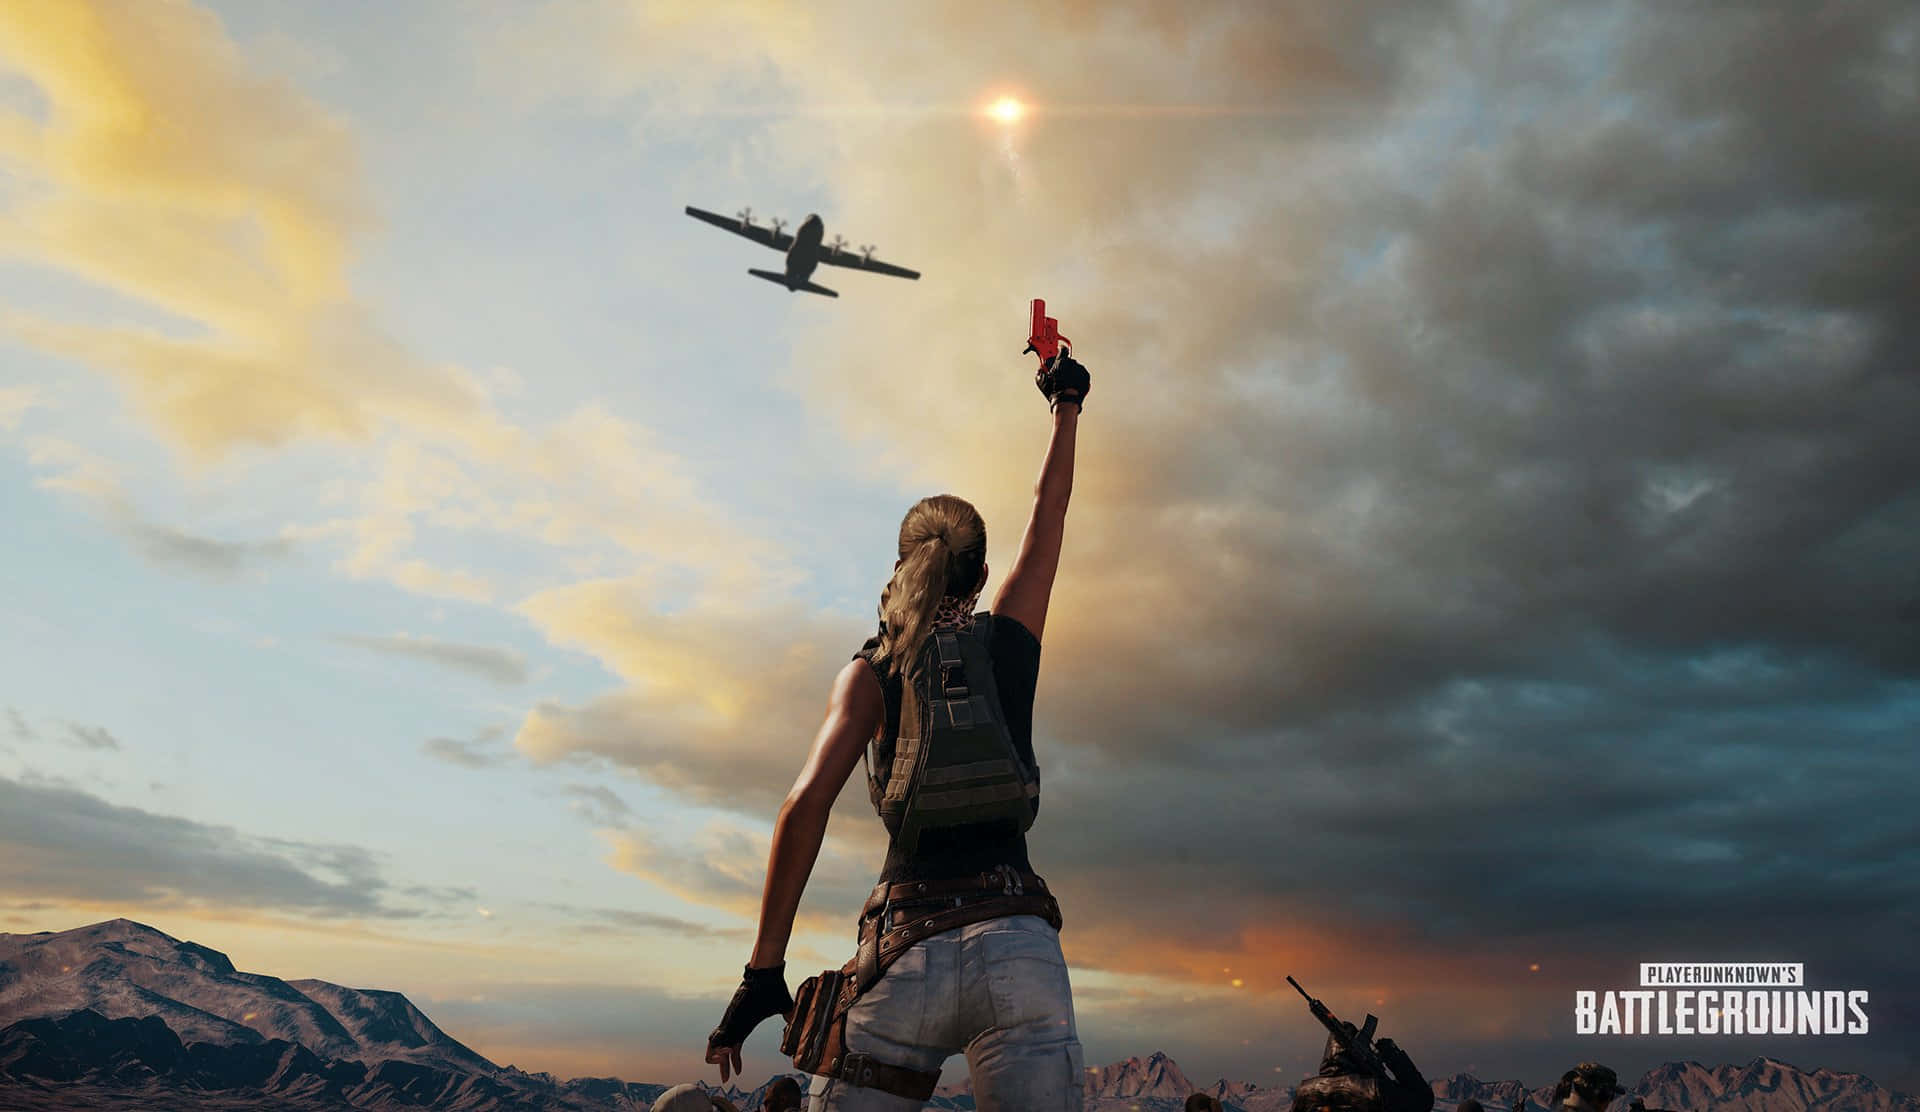 Pubg - A Woman Is Holding A Gun And Looking At The Sky